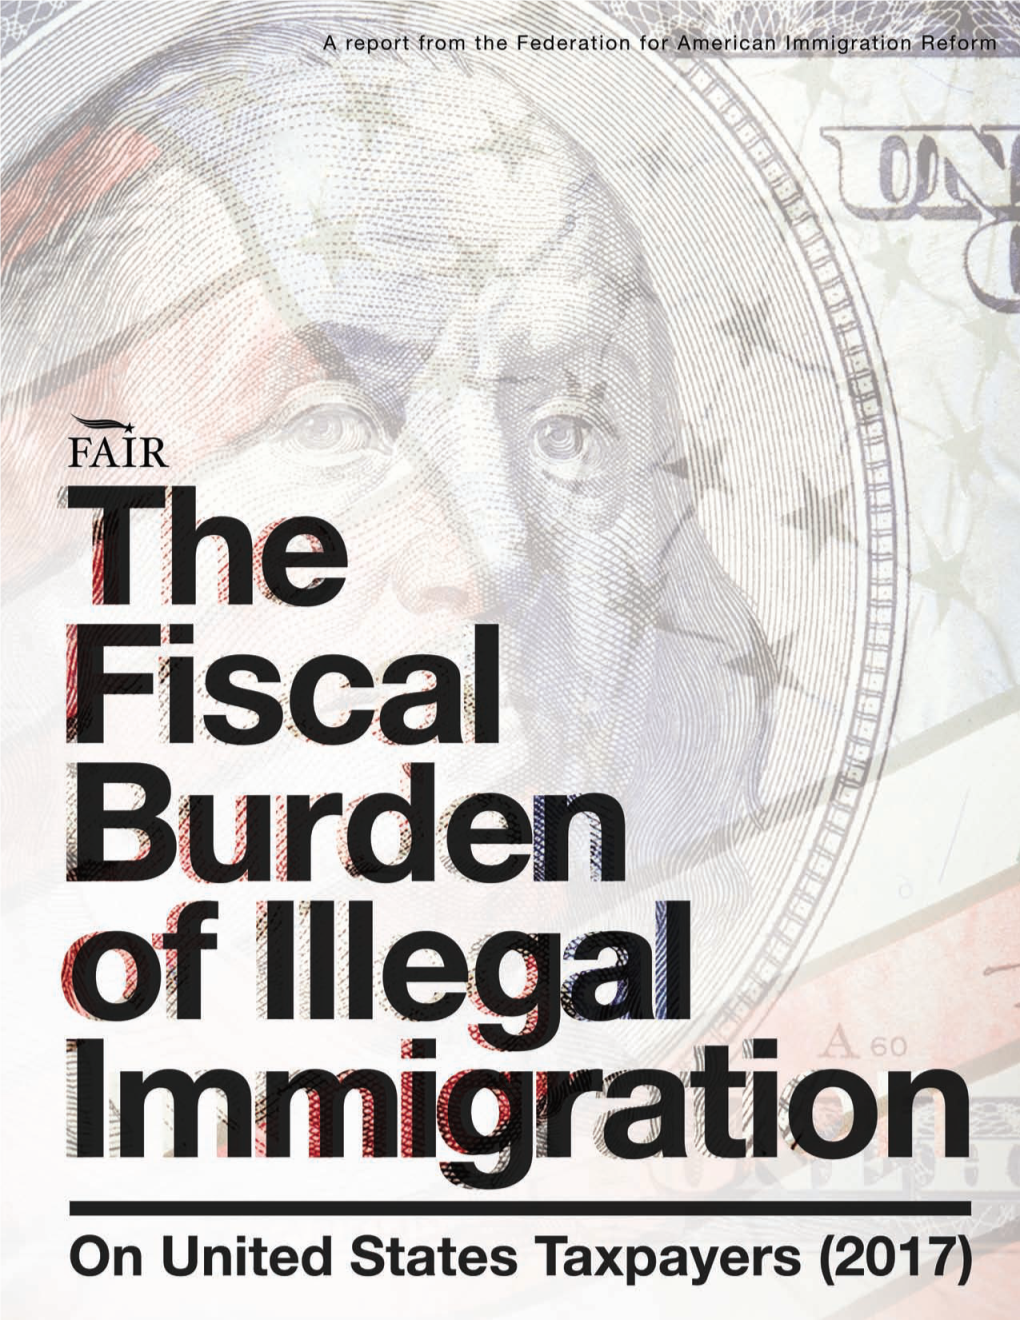 Fiscal Burden of Illegal Aliens on US Taxpayers